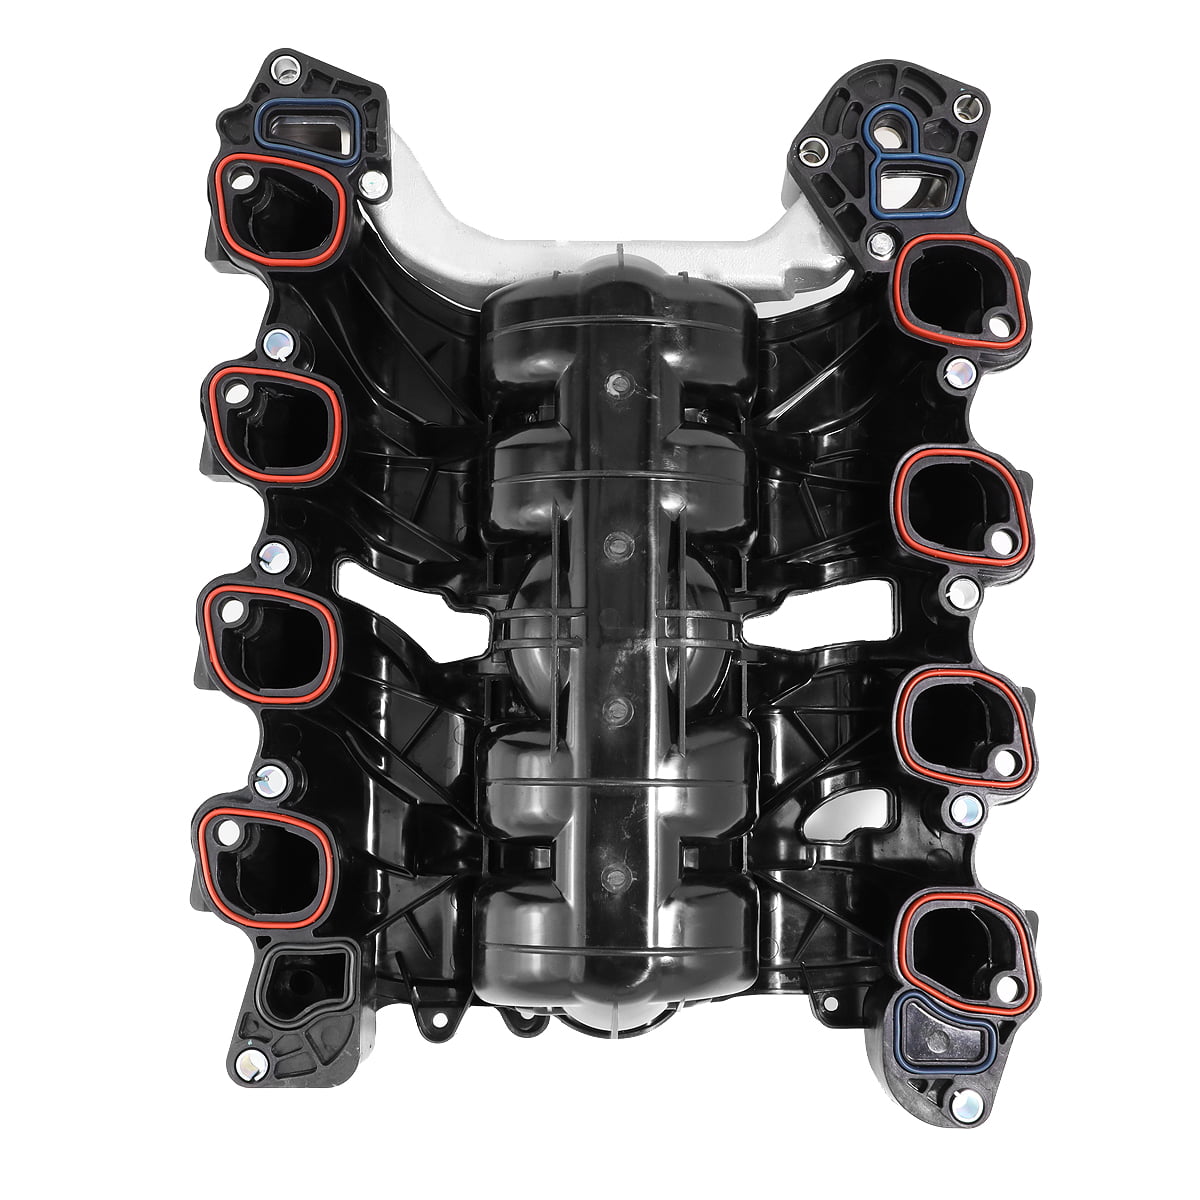 Engine Intake Manifold 615-775 for 00-05 Ford Explorer Mercury Mountaineer